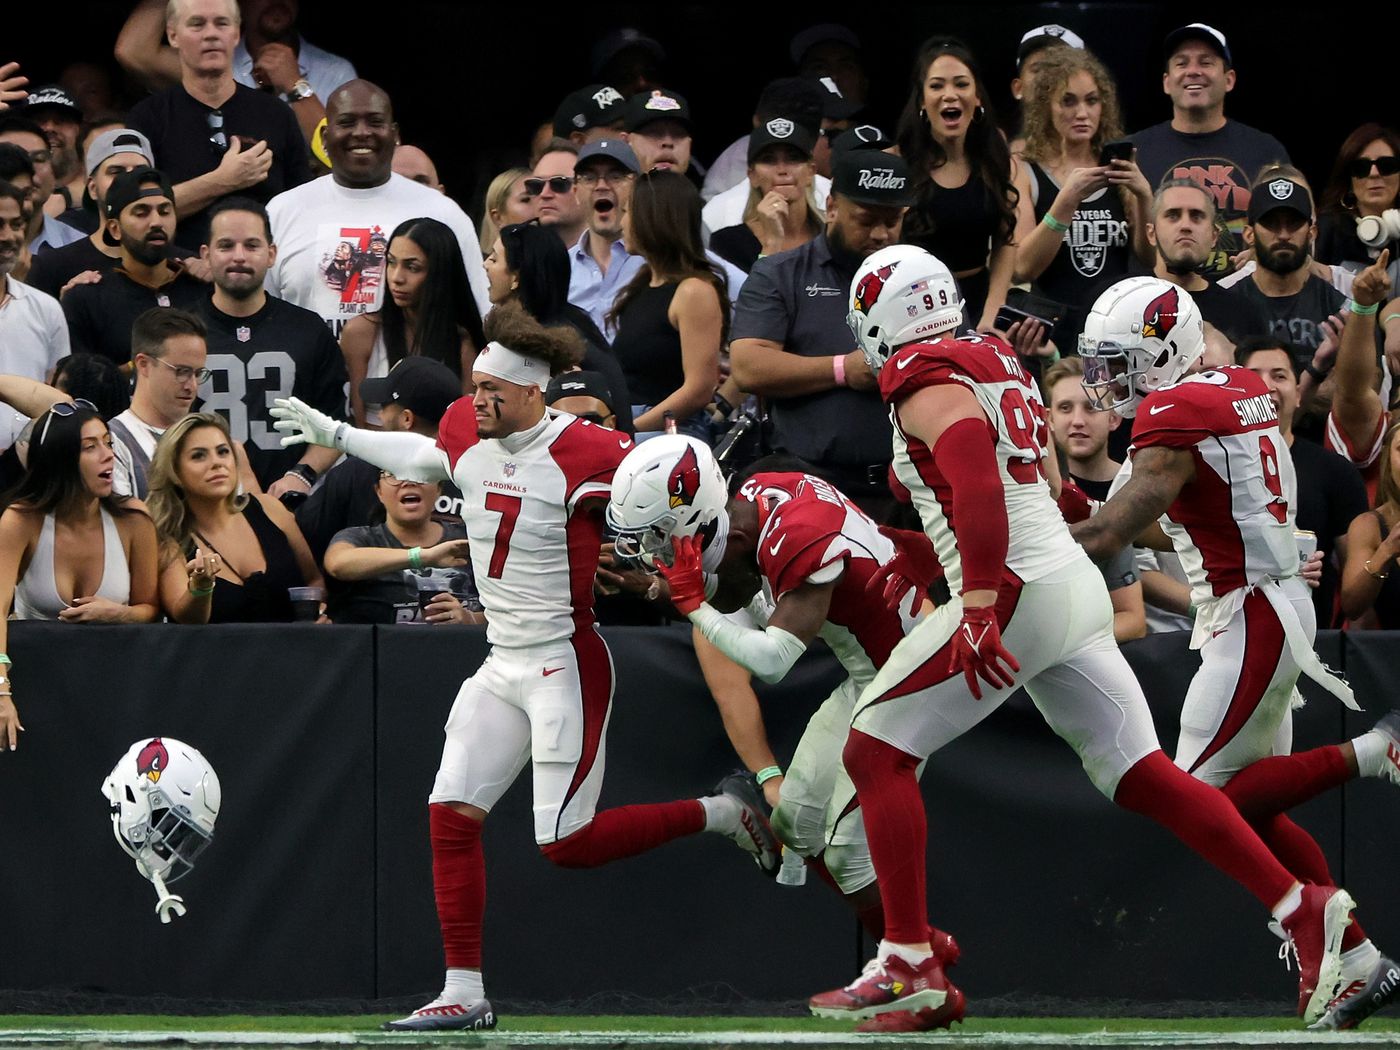 cardinals and raiders tickets